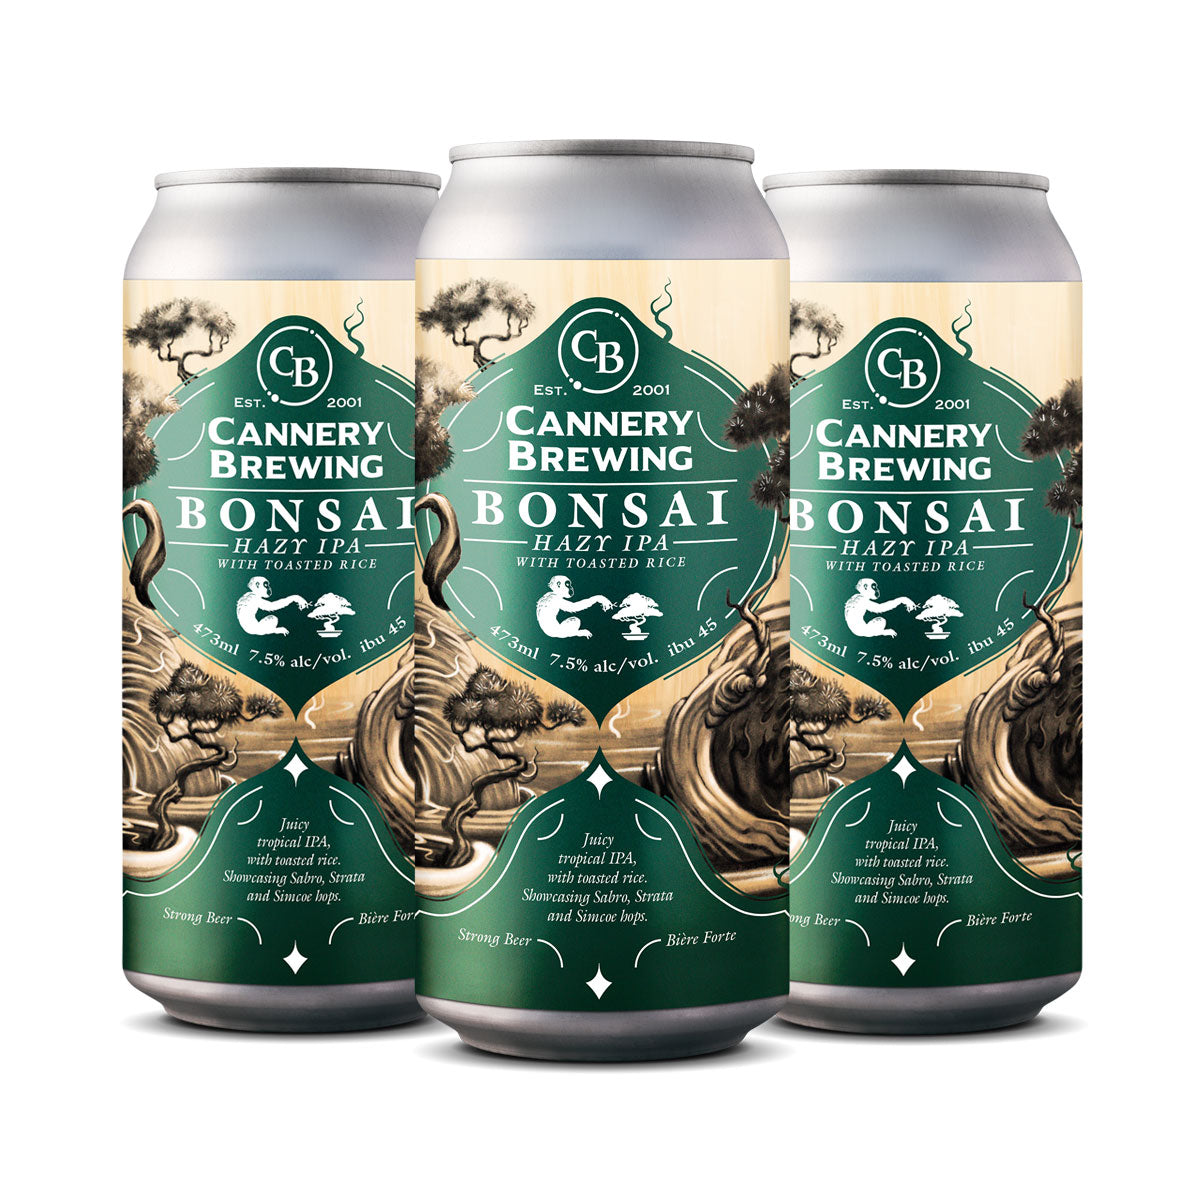 TAG Liquor Stores BC - Cannery Brewing Bonsai Hazy IPA Beer 4 Pack Cans